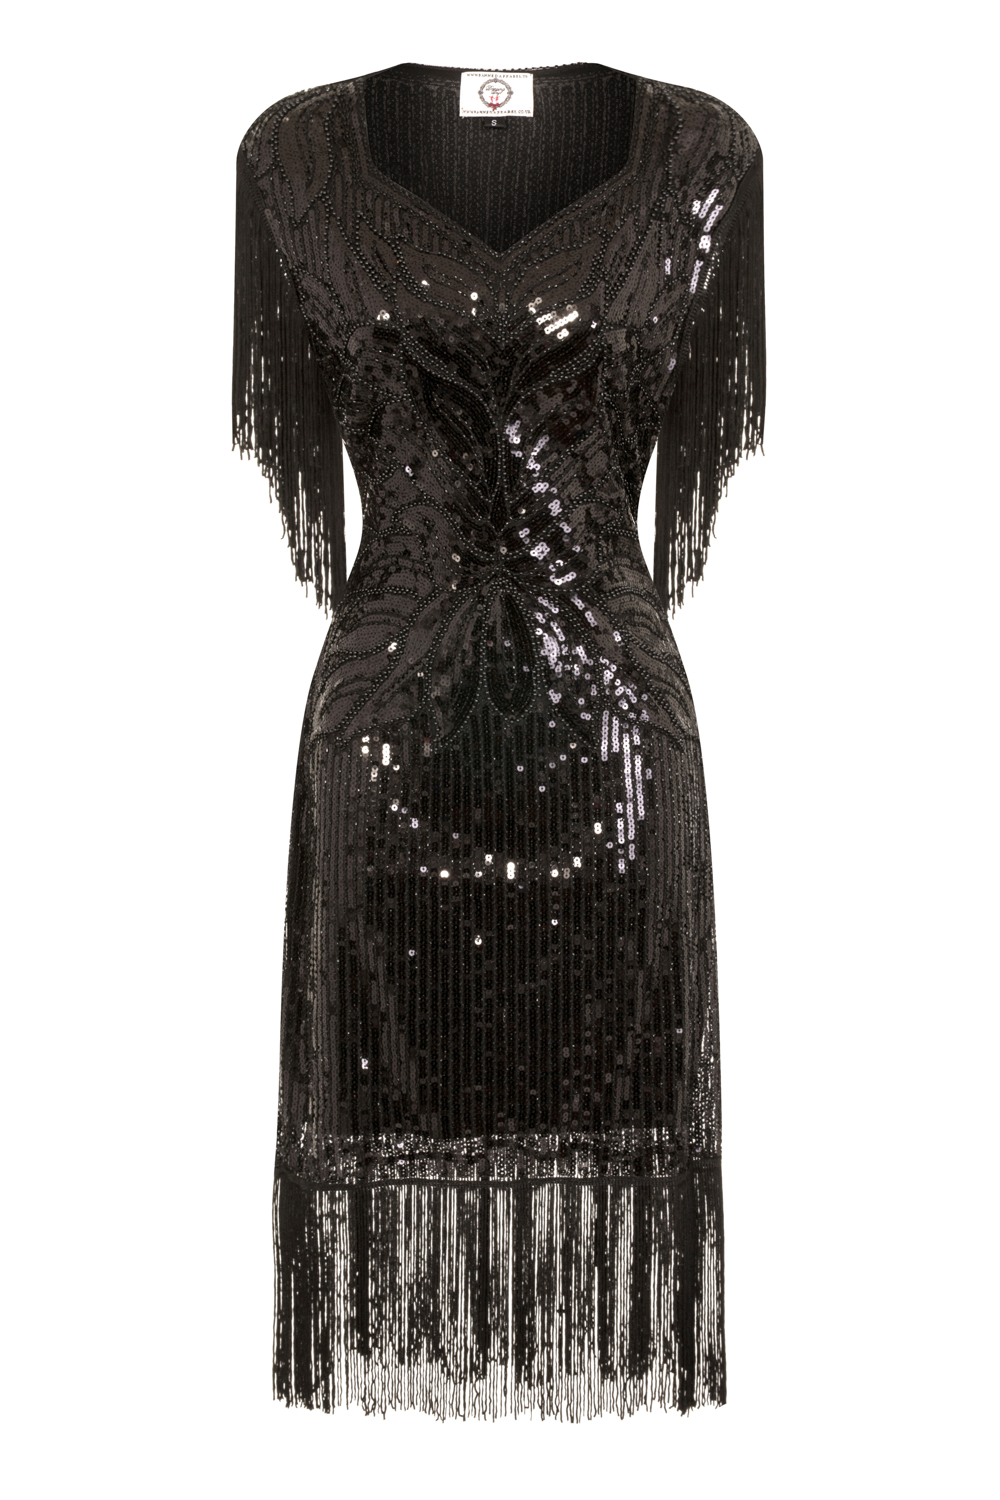 Great Gatsby Dresses For Sale | UKs Leading Vintage Dress Store